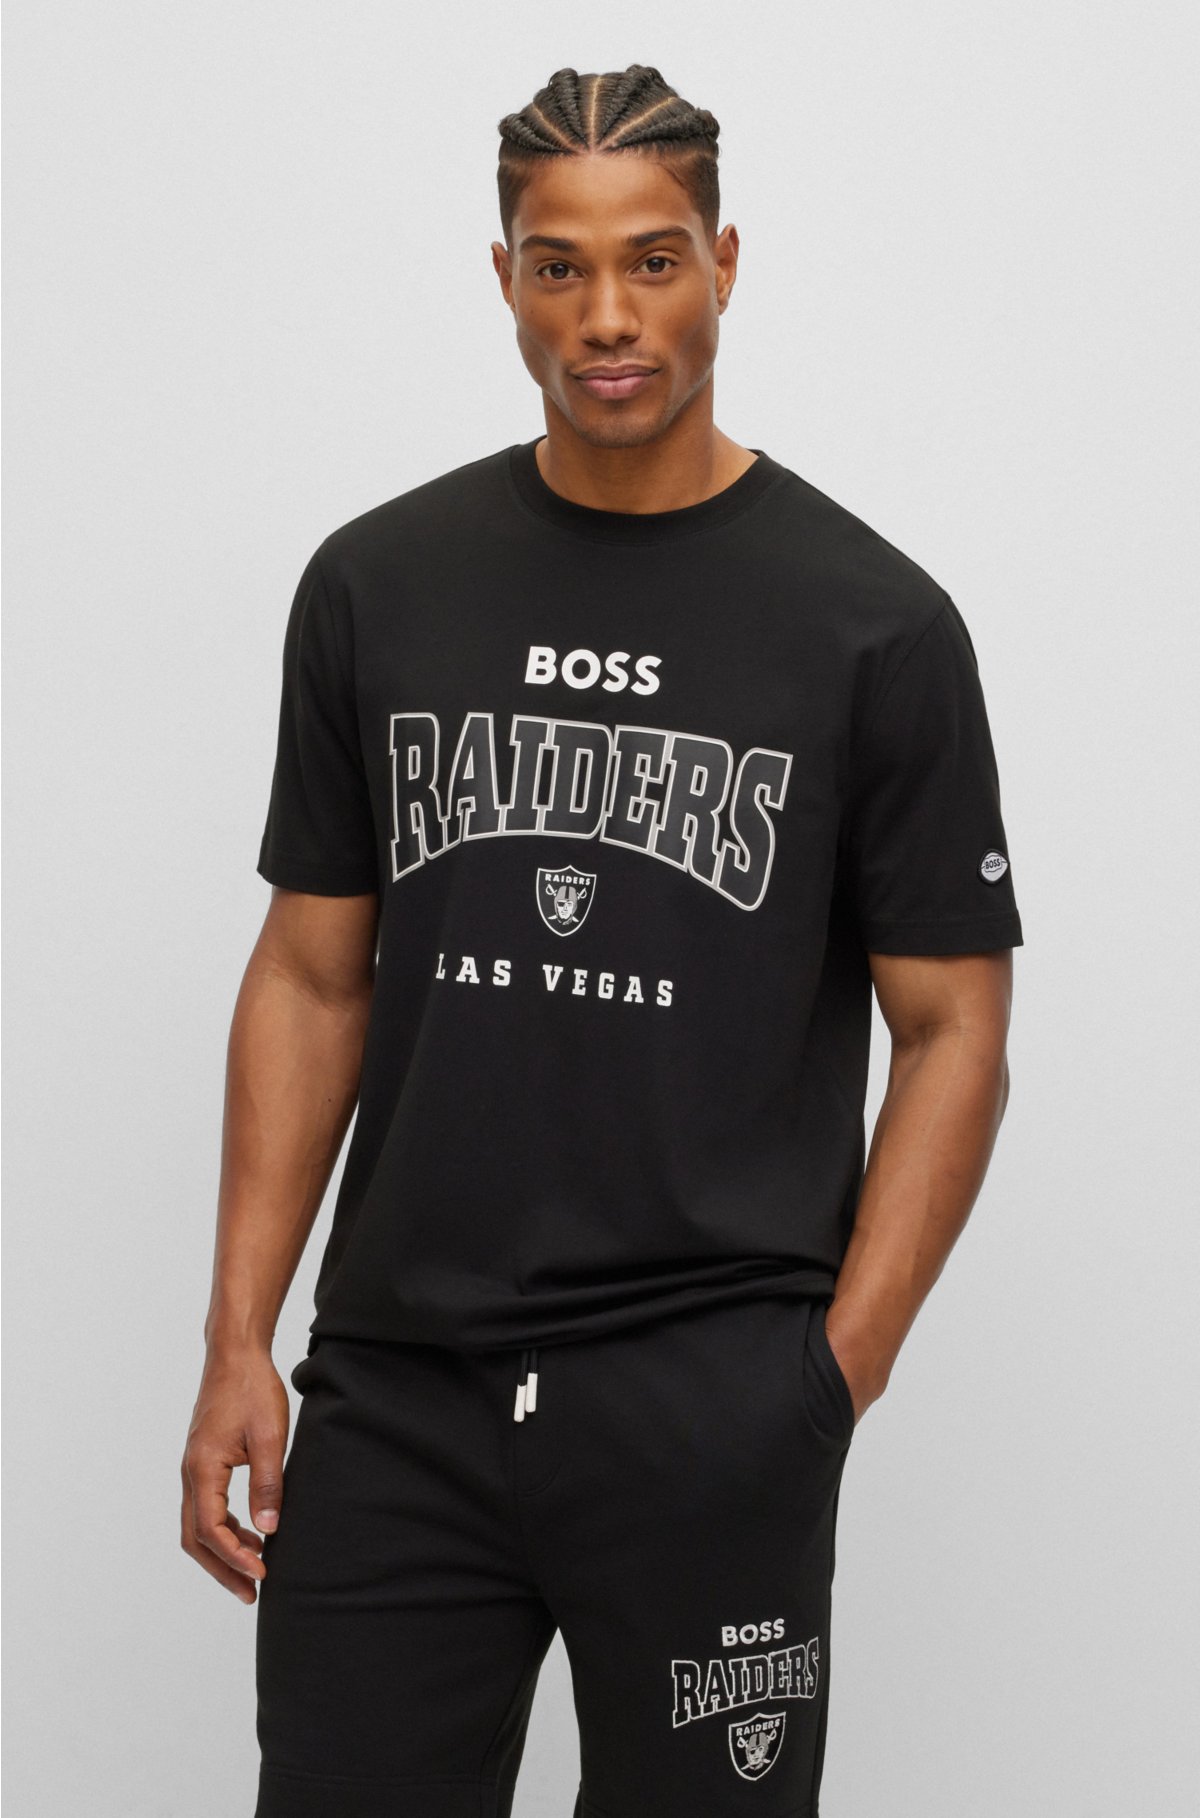 BOSS x NFL stretch-cotton T-shirt with collaborative branding, Raiders